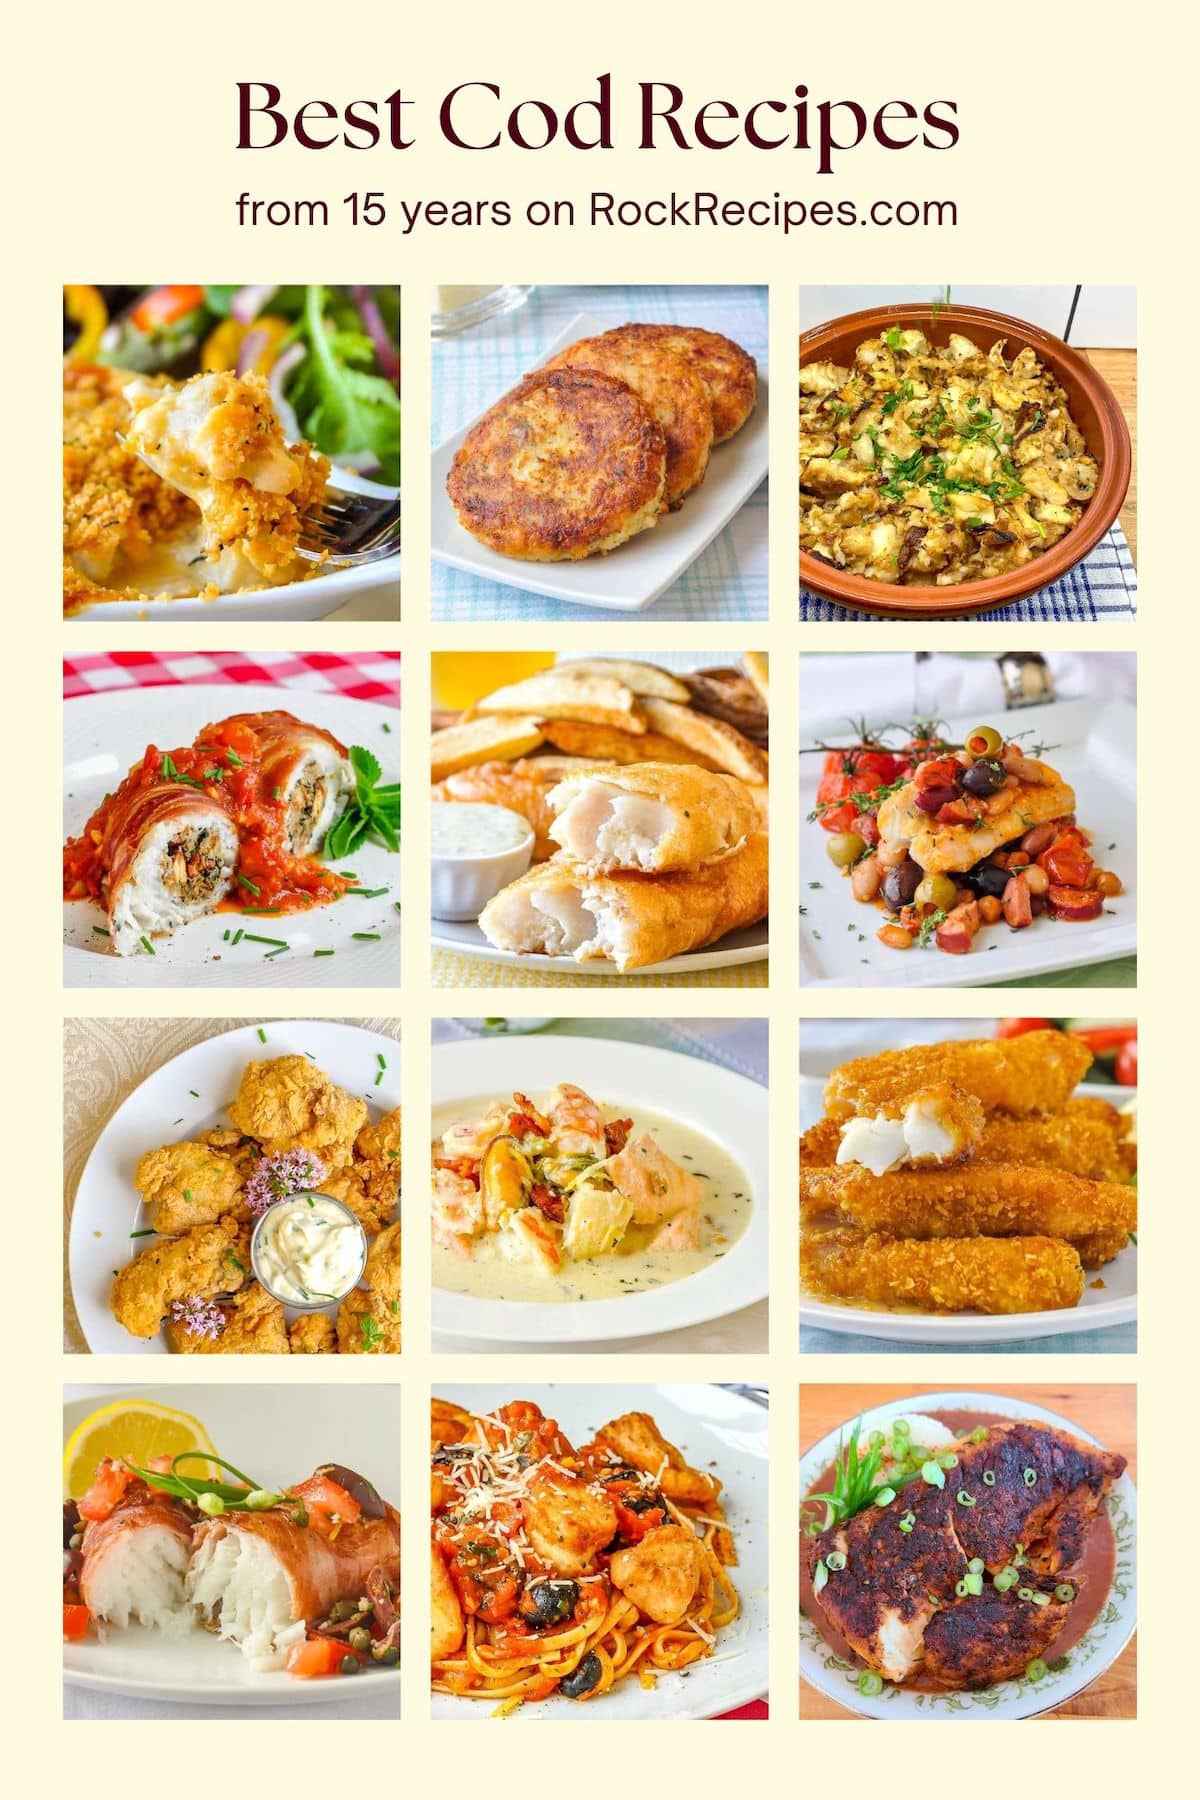 Photo collage of 12 cod fish recipes.